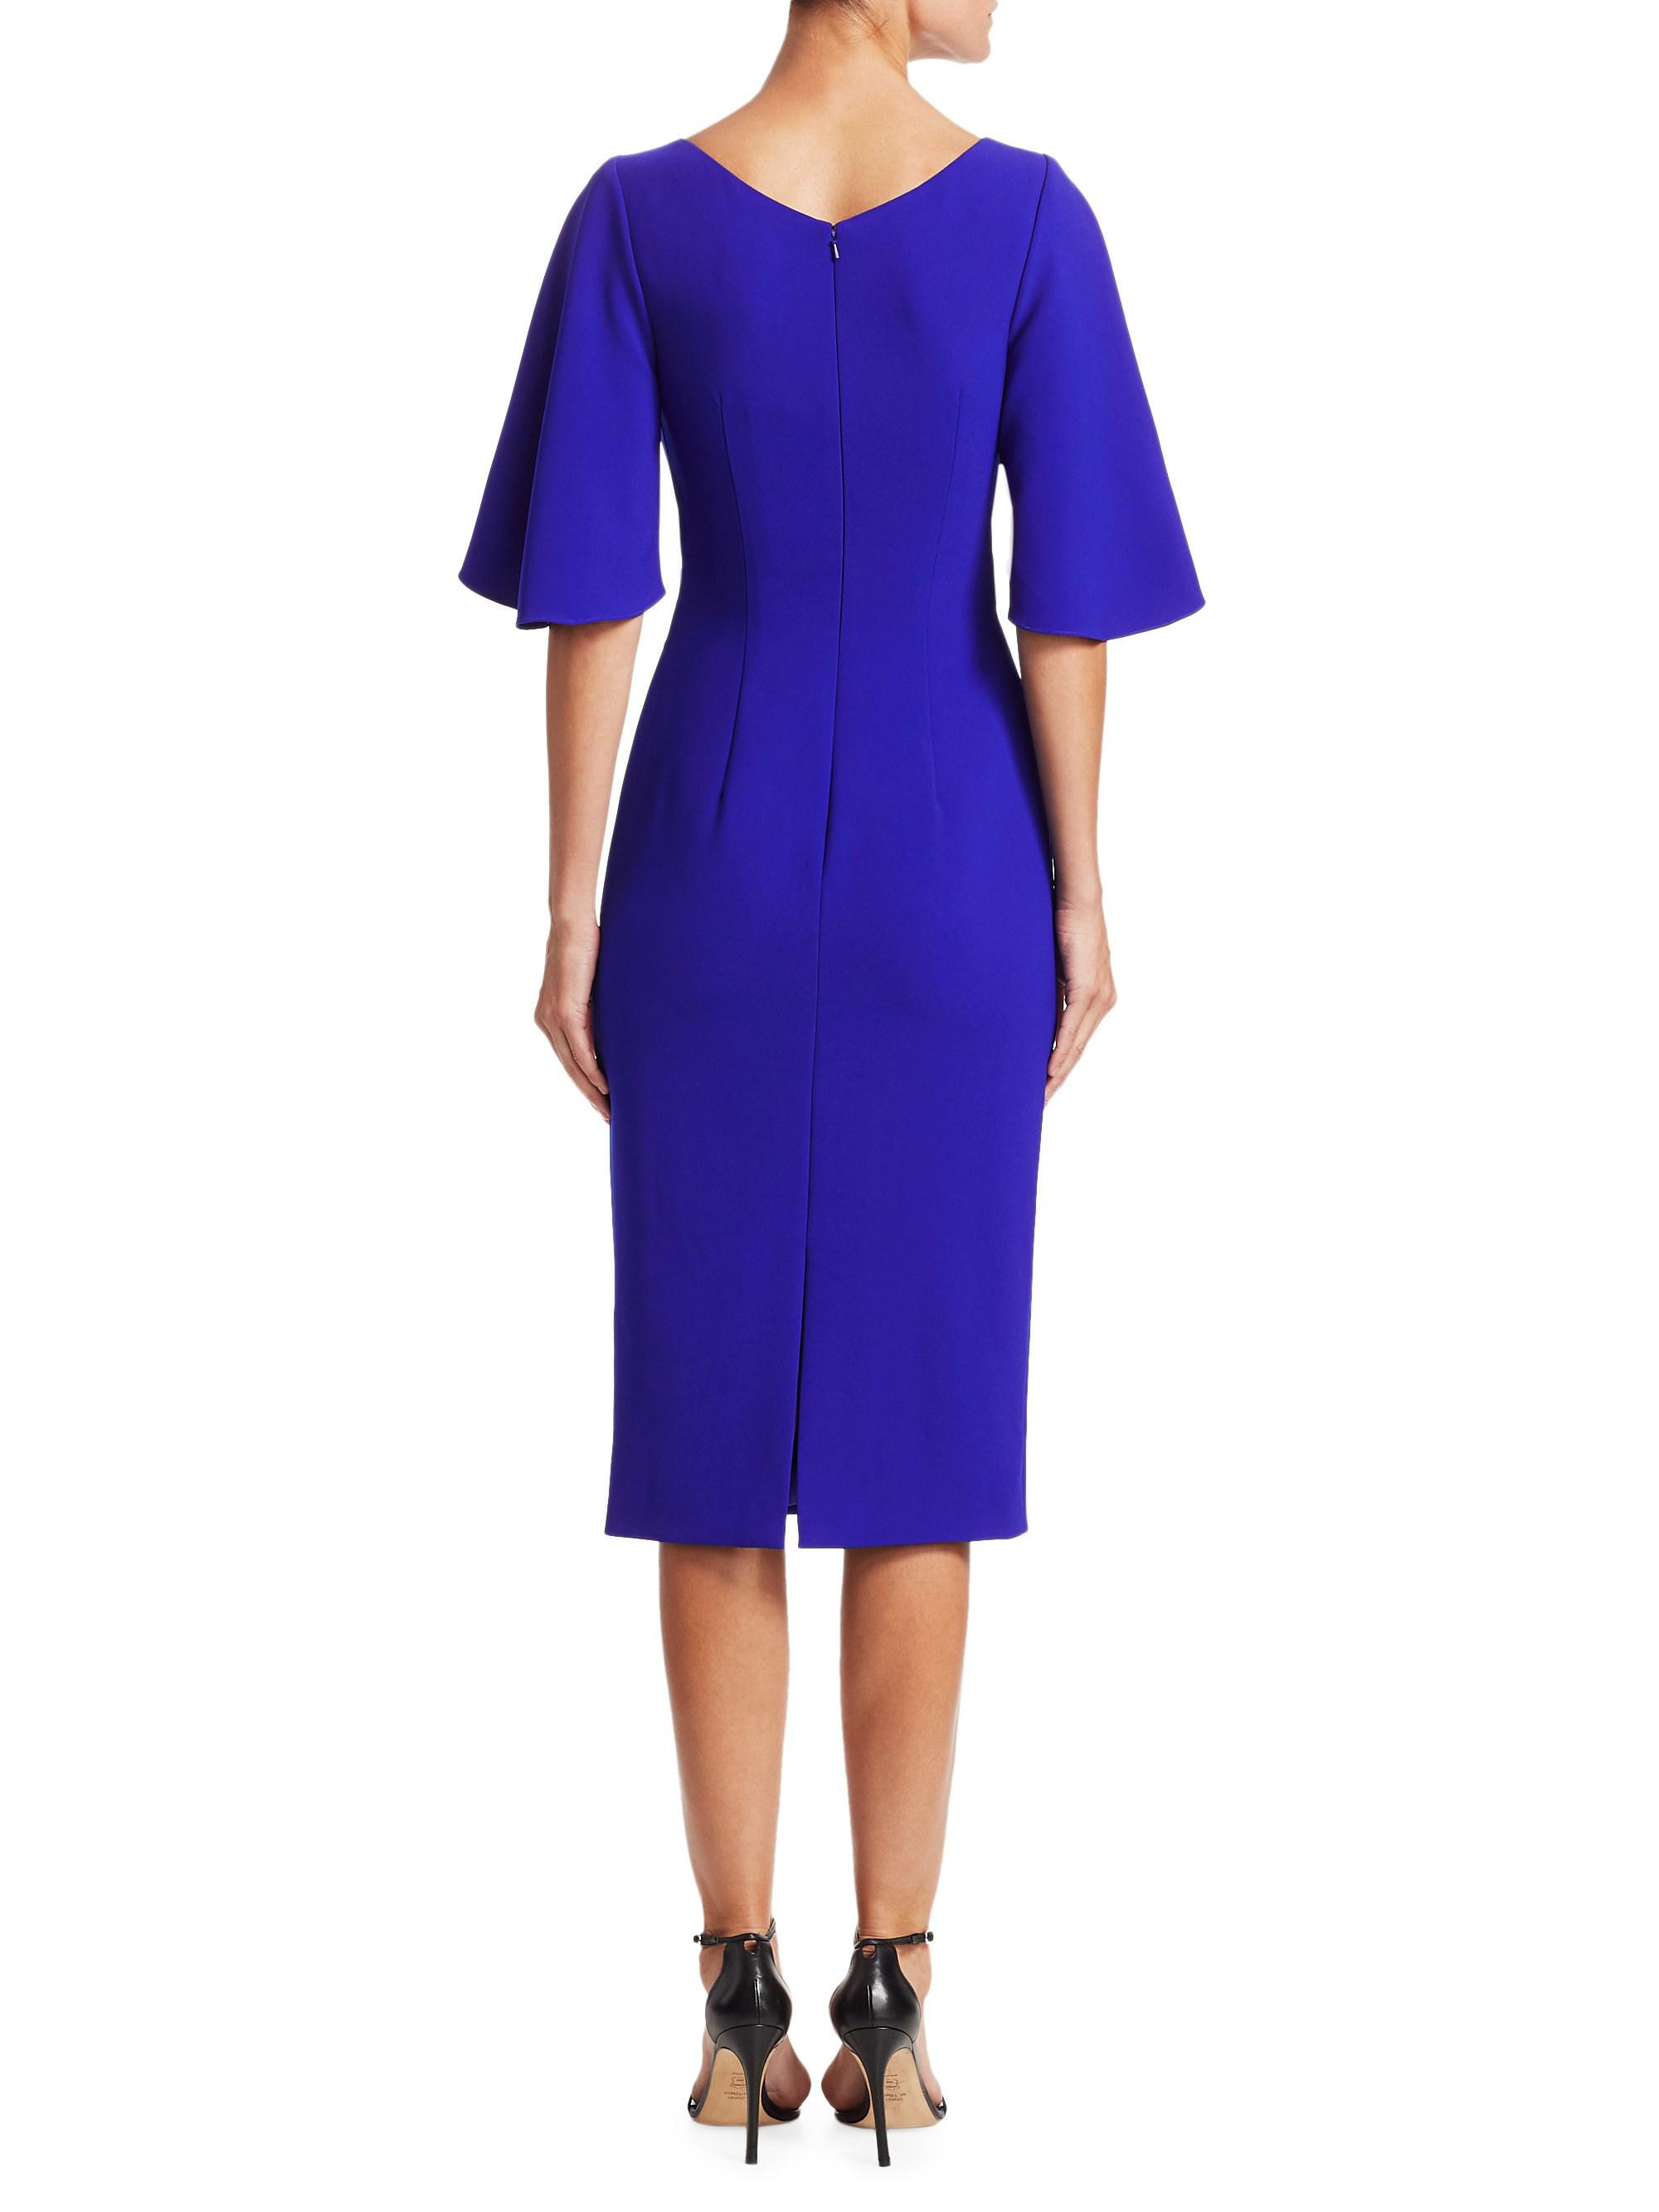 THEIA Crepe Flutter-sleeve Cocktail Dress in Purple - Lyst